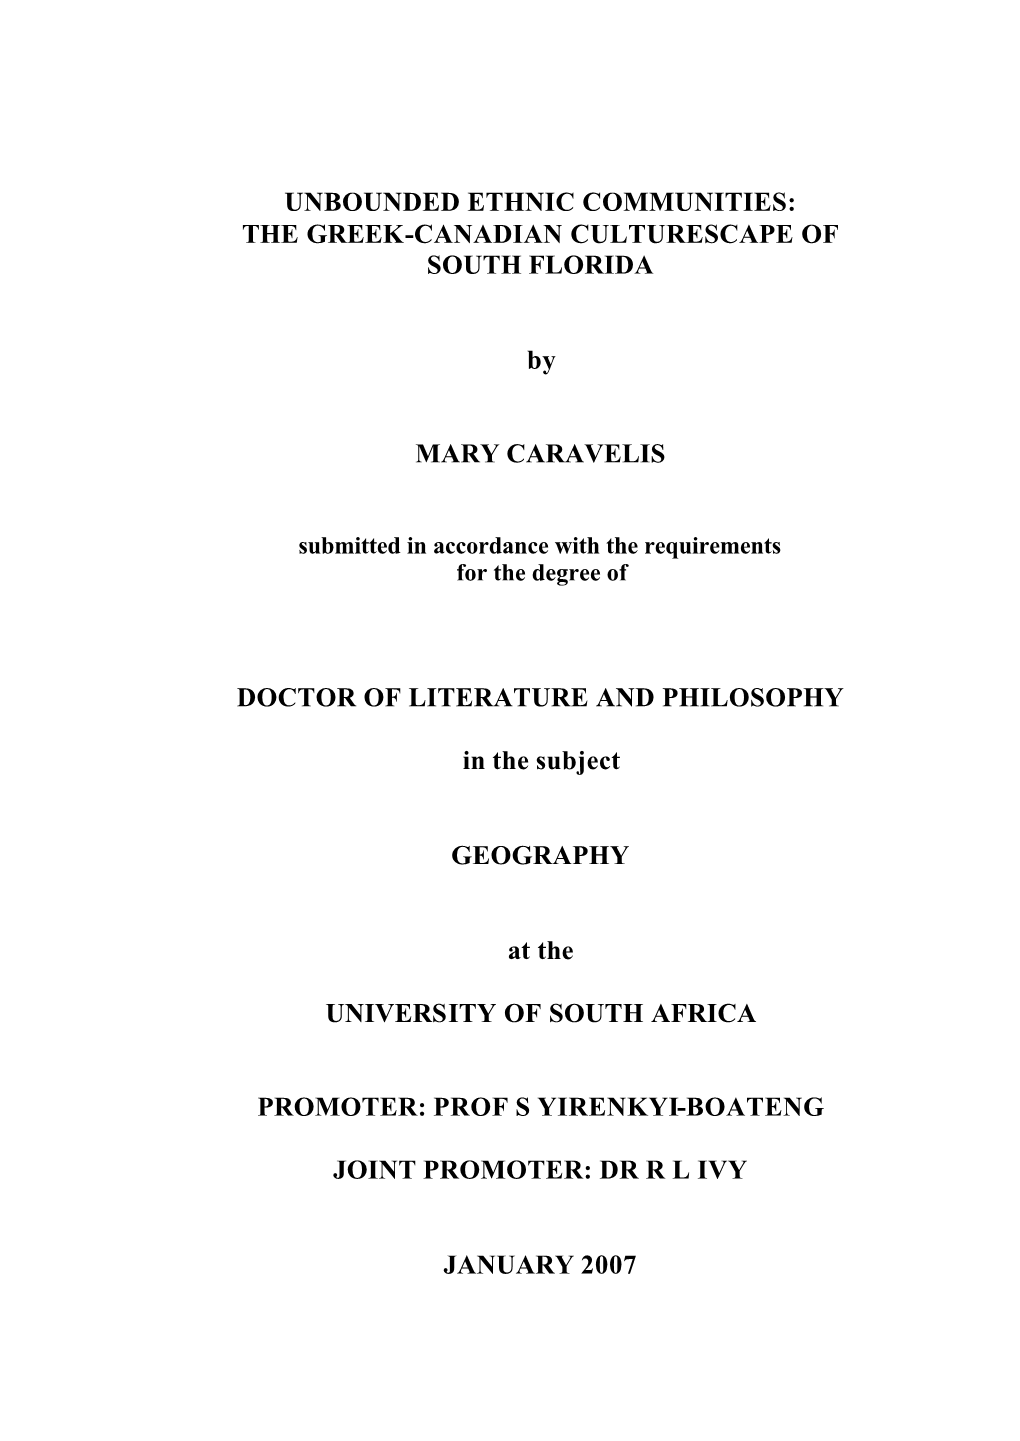 UNBOUNDED ETHNIC COMMUNITIES: the GREEK-CANADIAN CULTURESCAPE of SOUTH FLORIDA by MARY CARAVELIS DOCTOR of LITERATURE and PHILO